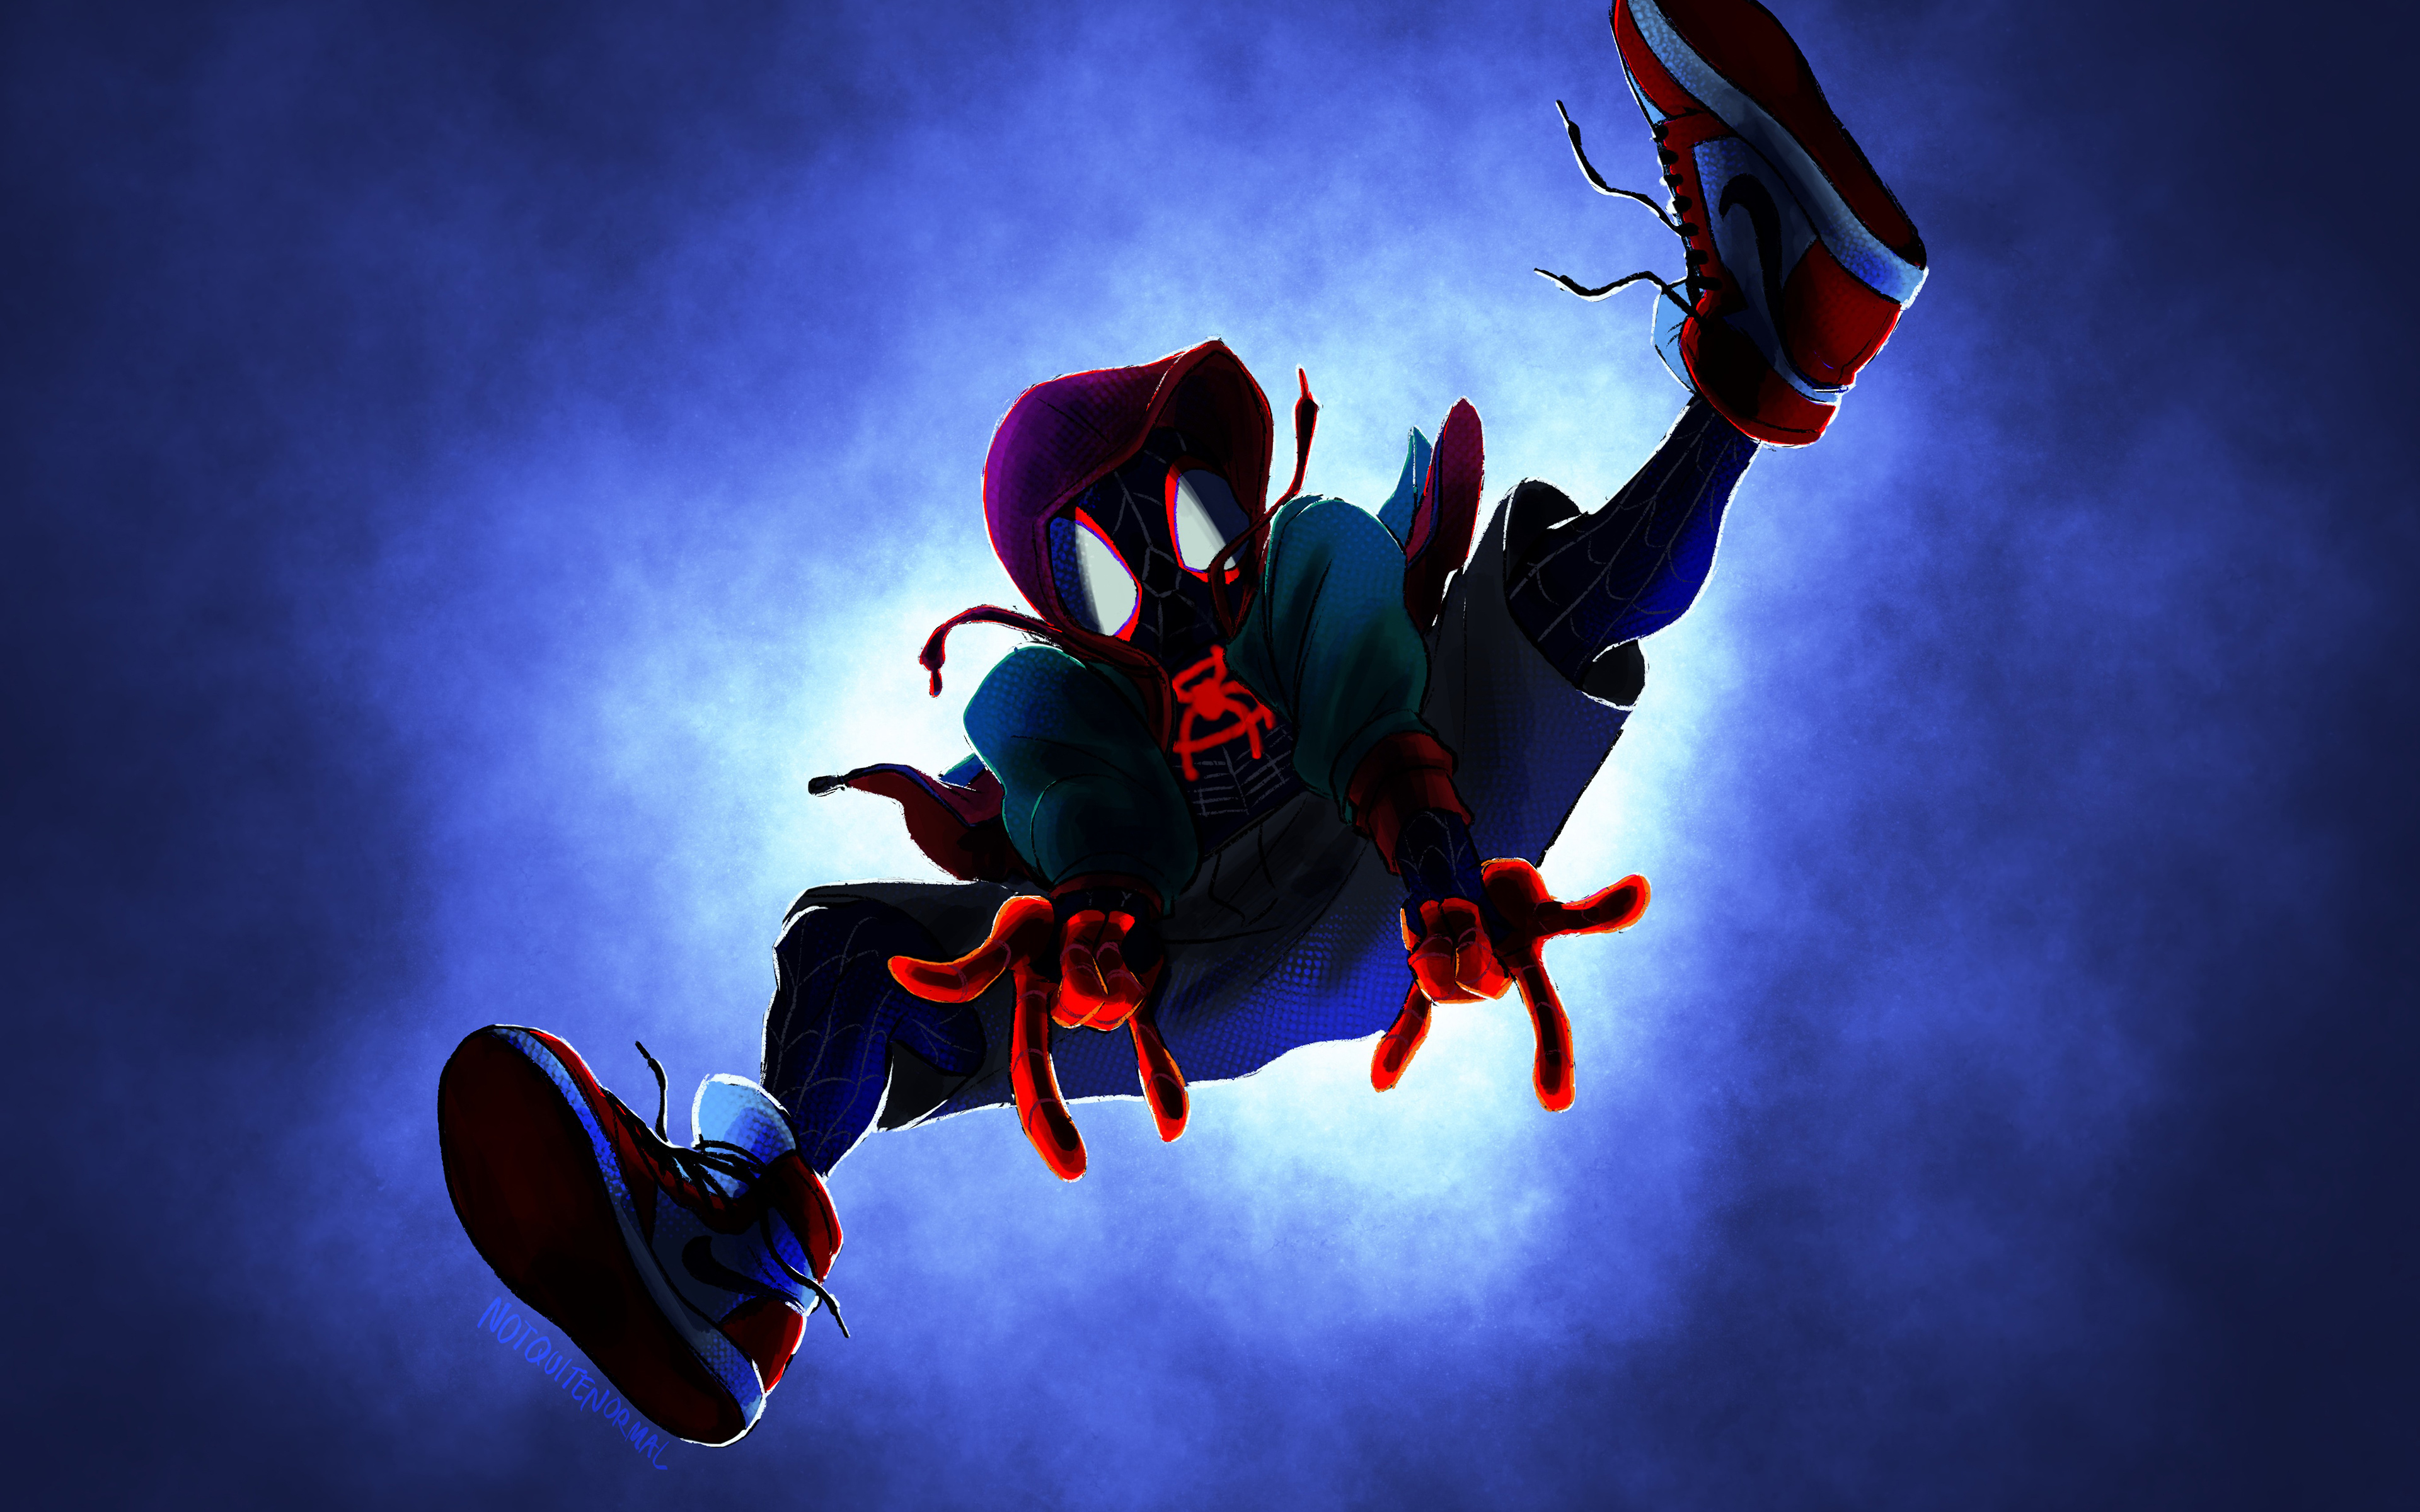 Movie Spider-Man: Into The Spider-Verse 4k Ultra HD Wallpaper by